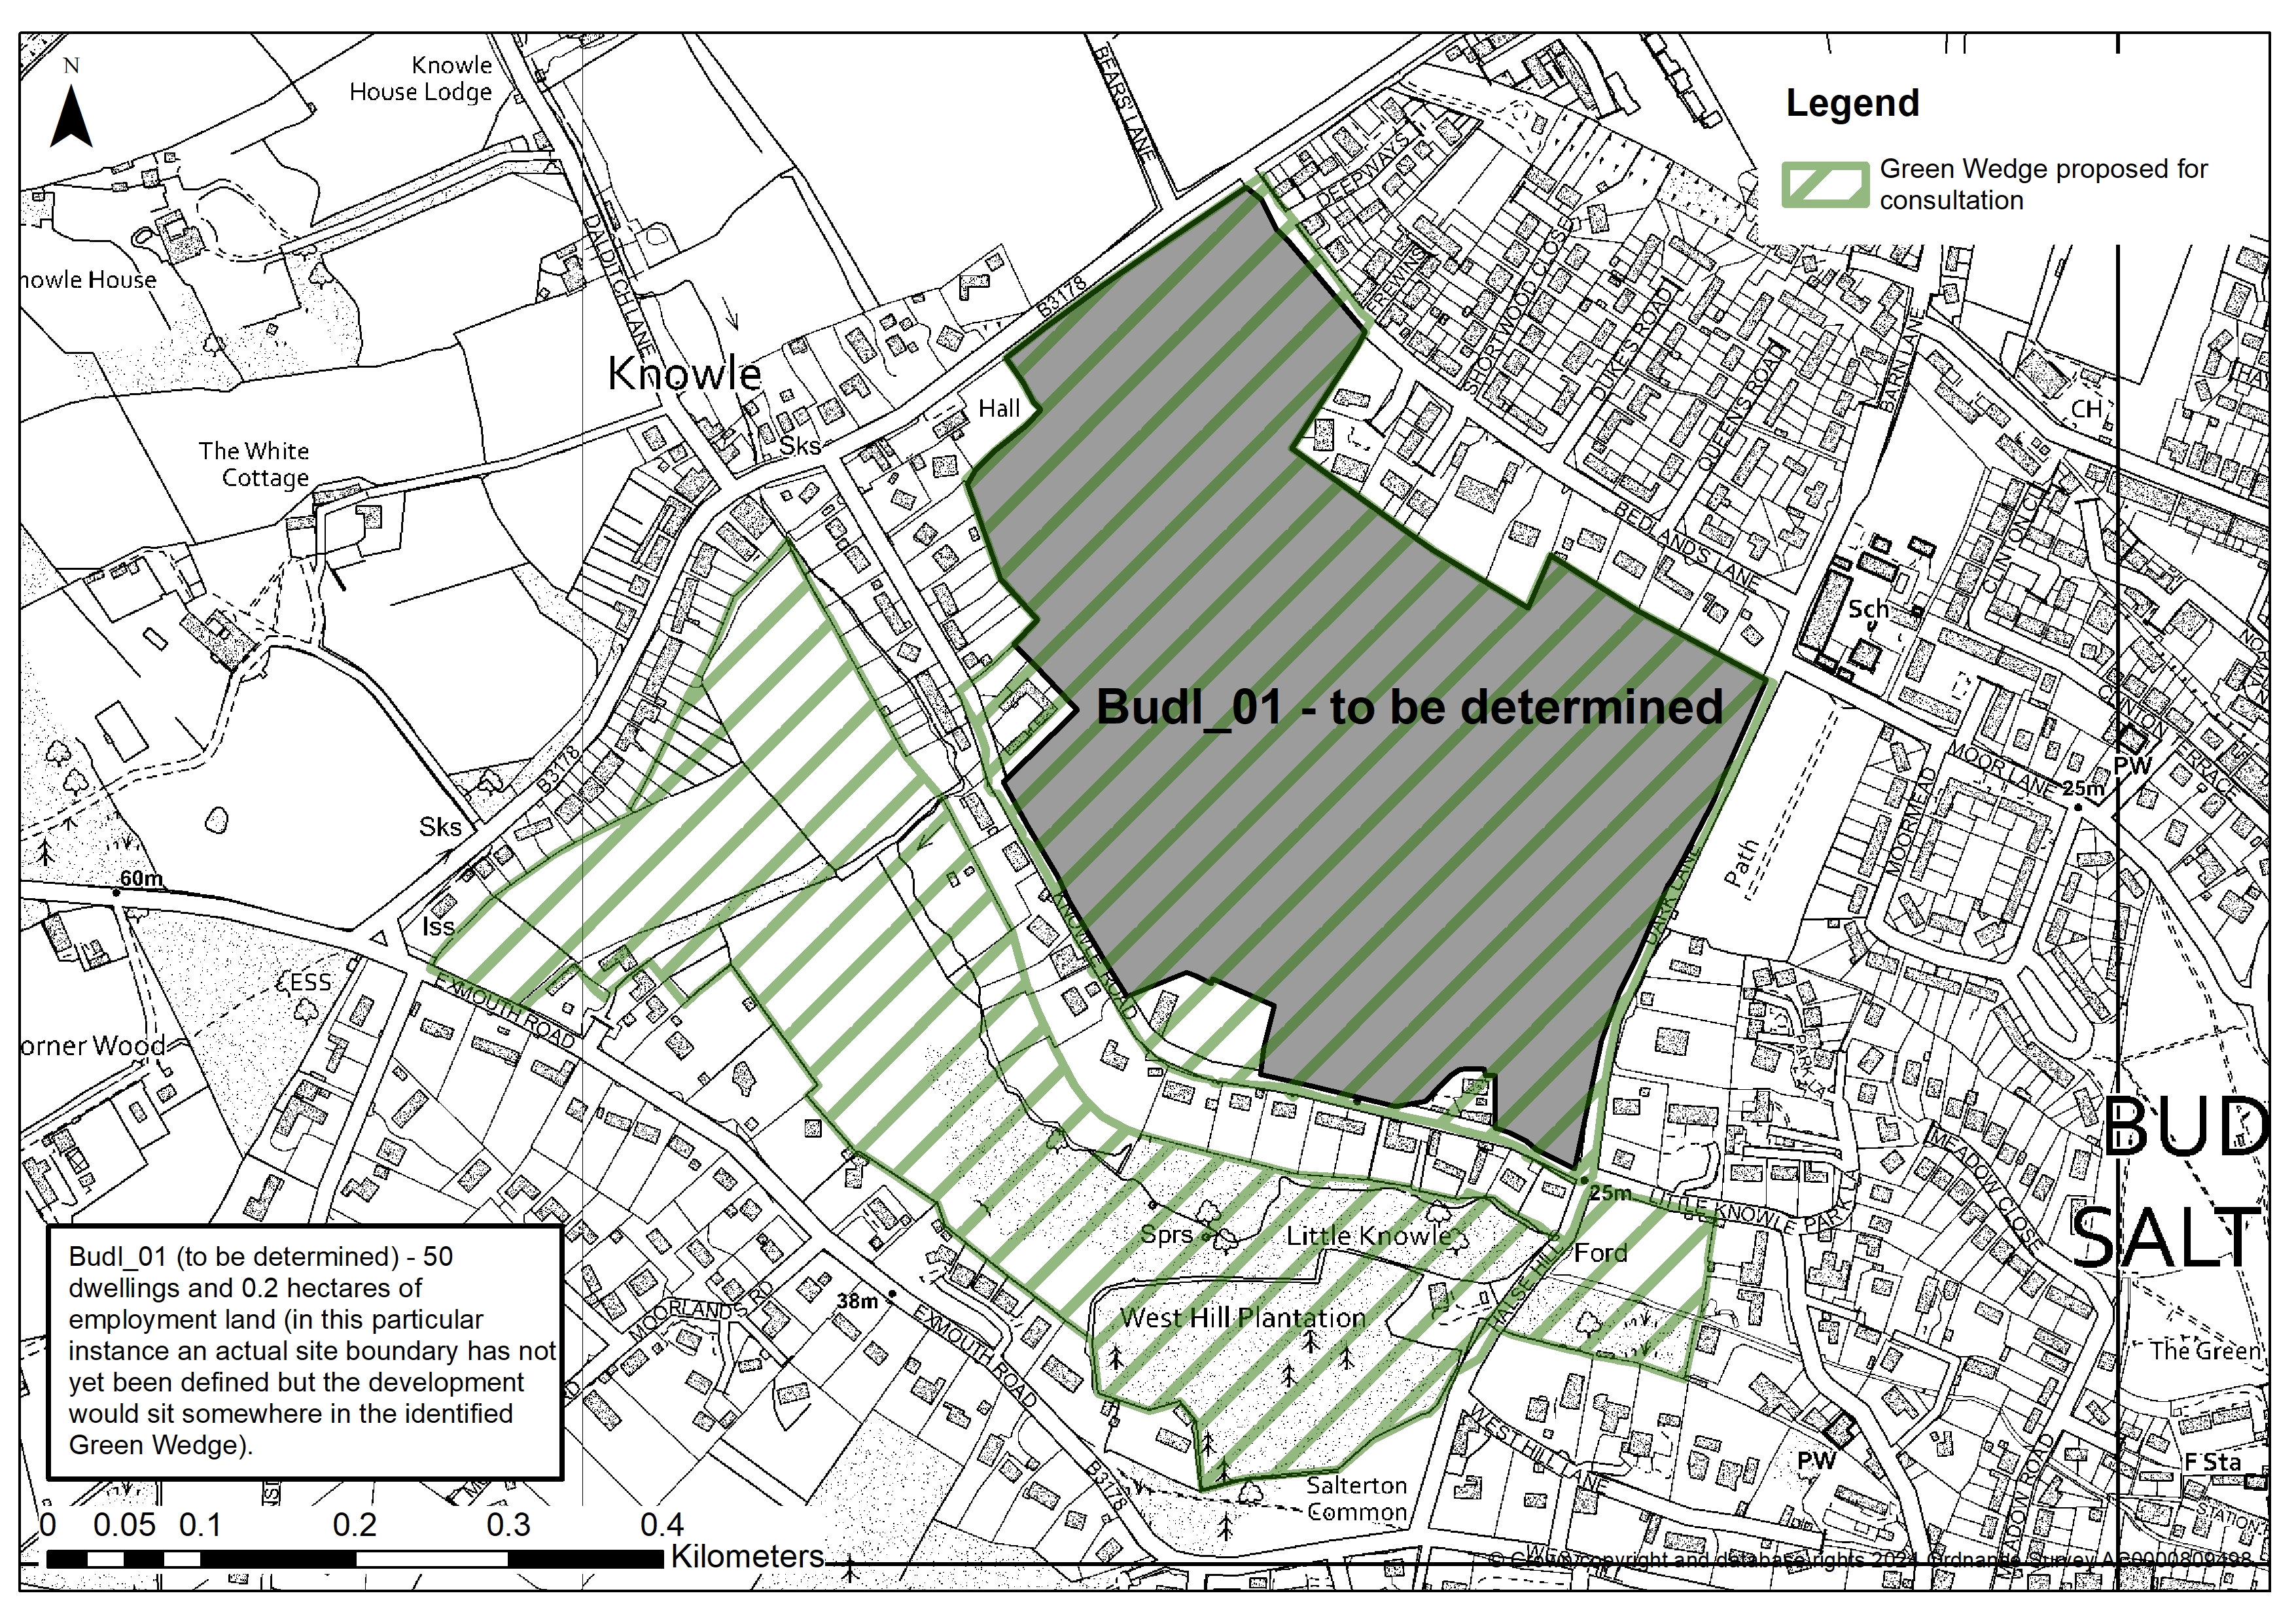 Map of the proposed Green Wedge between Budleigh Salterton and Knowle